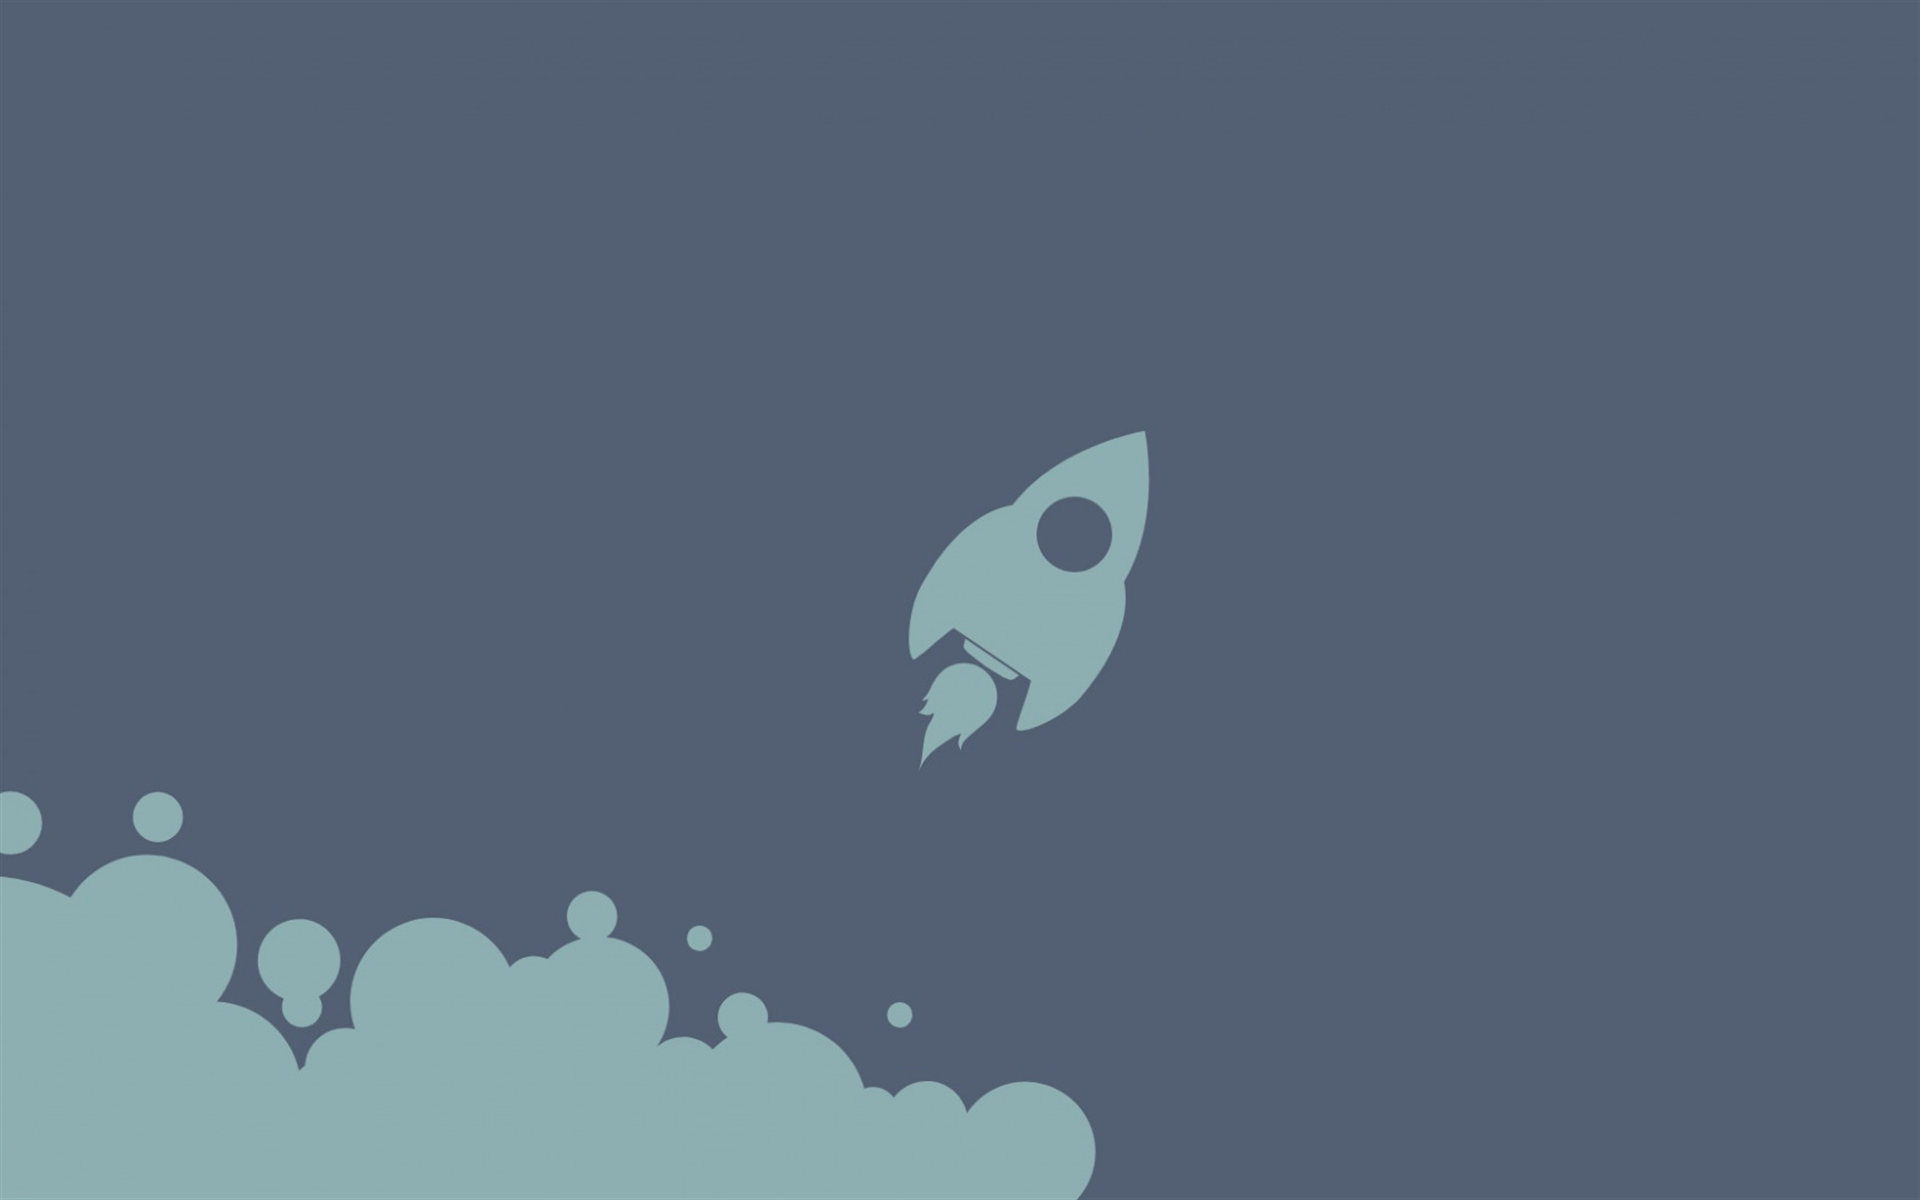 Download wallpapers startup concepts rocket startup minimalism business concepts start